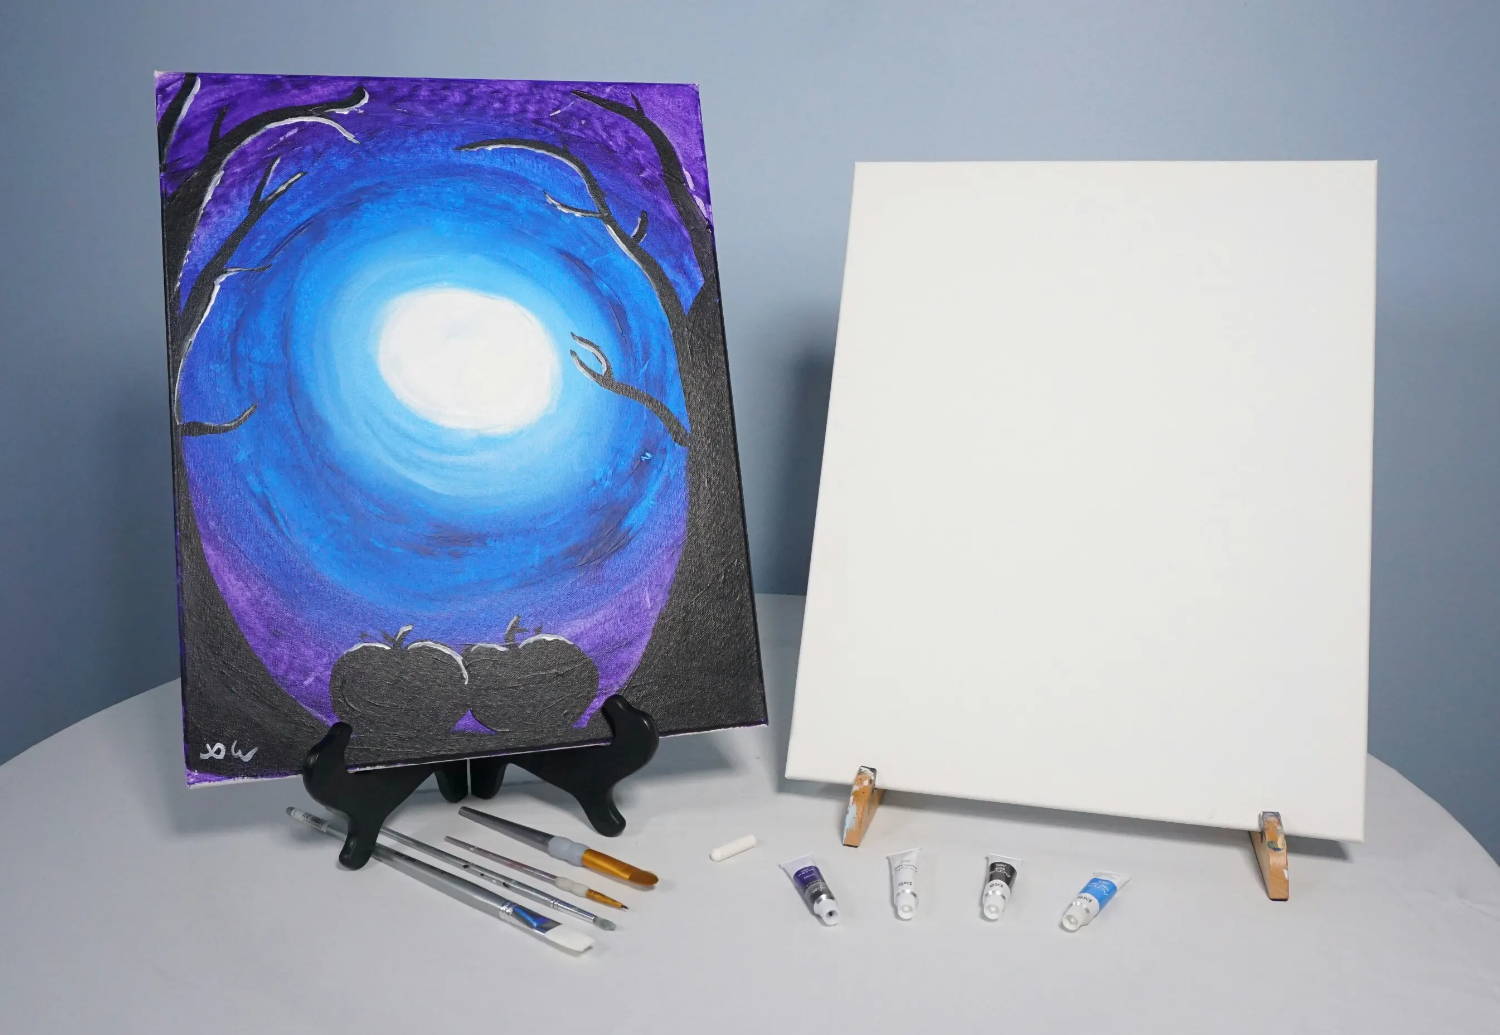 This is Halloween Paint at Home Kit and Video, Sip and Paint